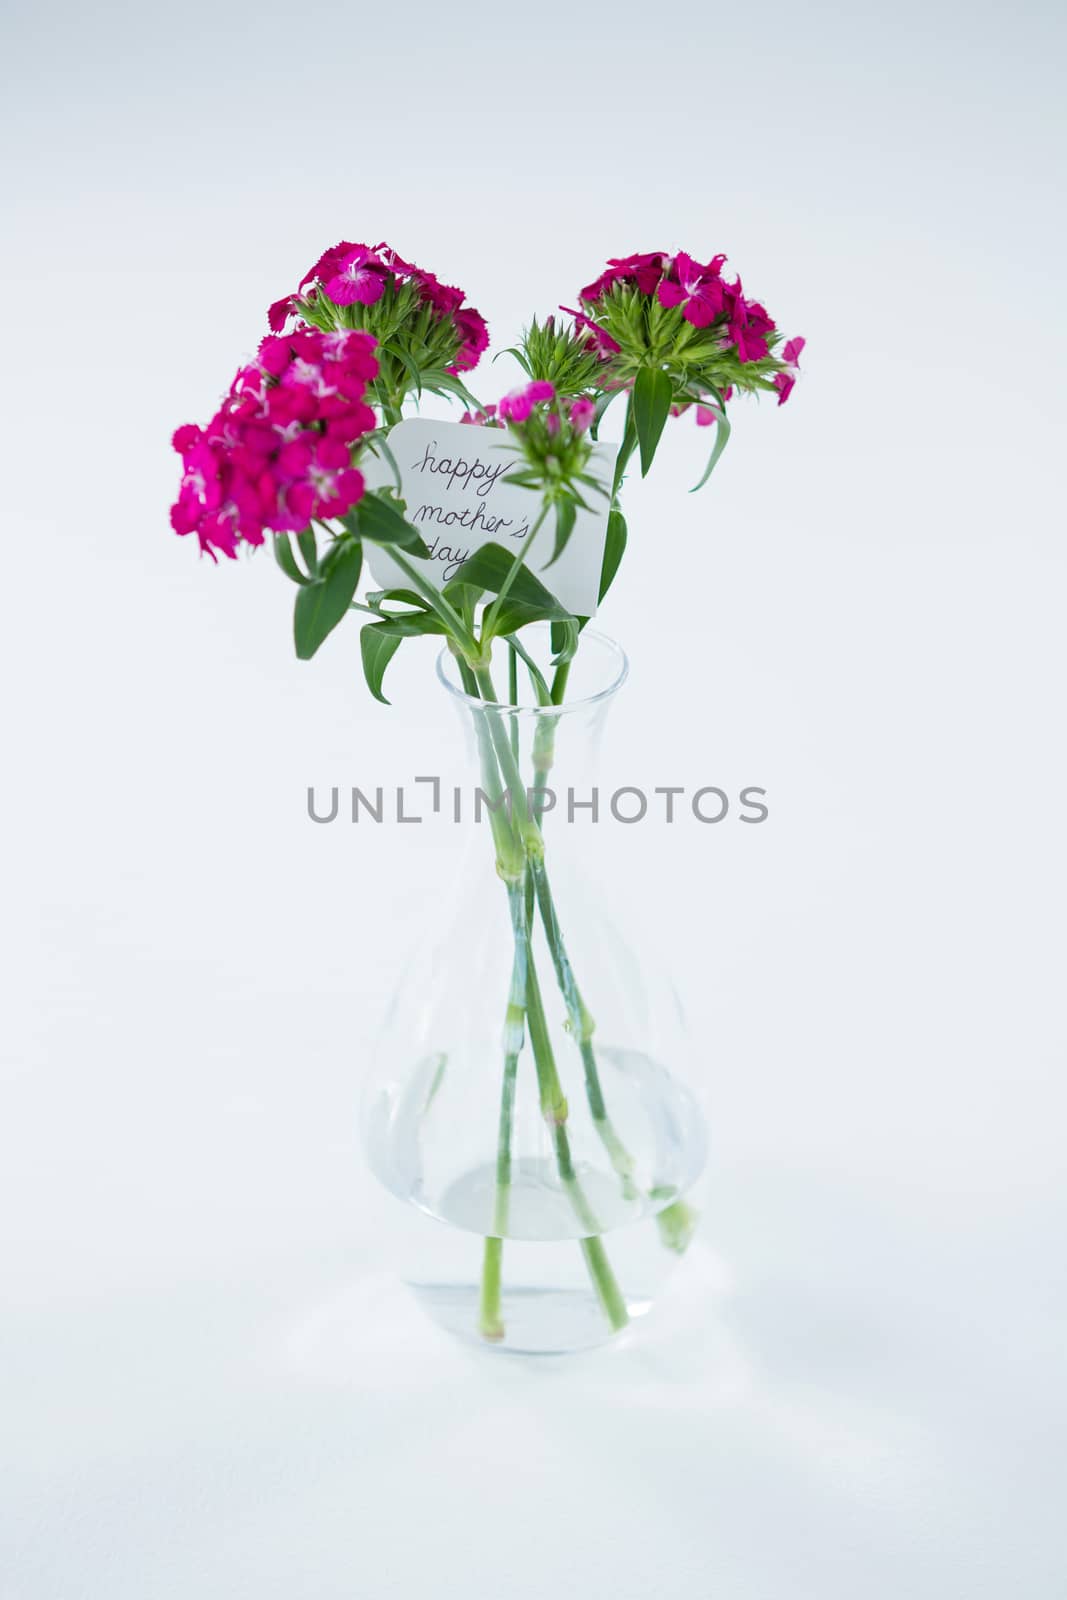 Bunch of pink roses with happy mothers day tag in flower vase on white background